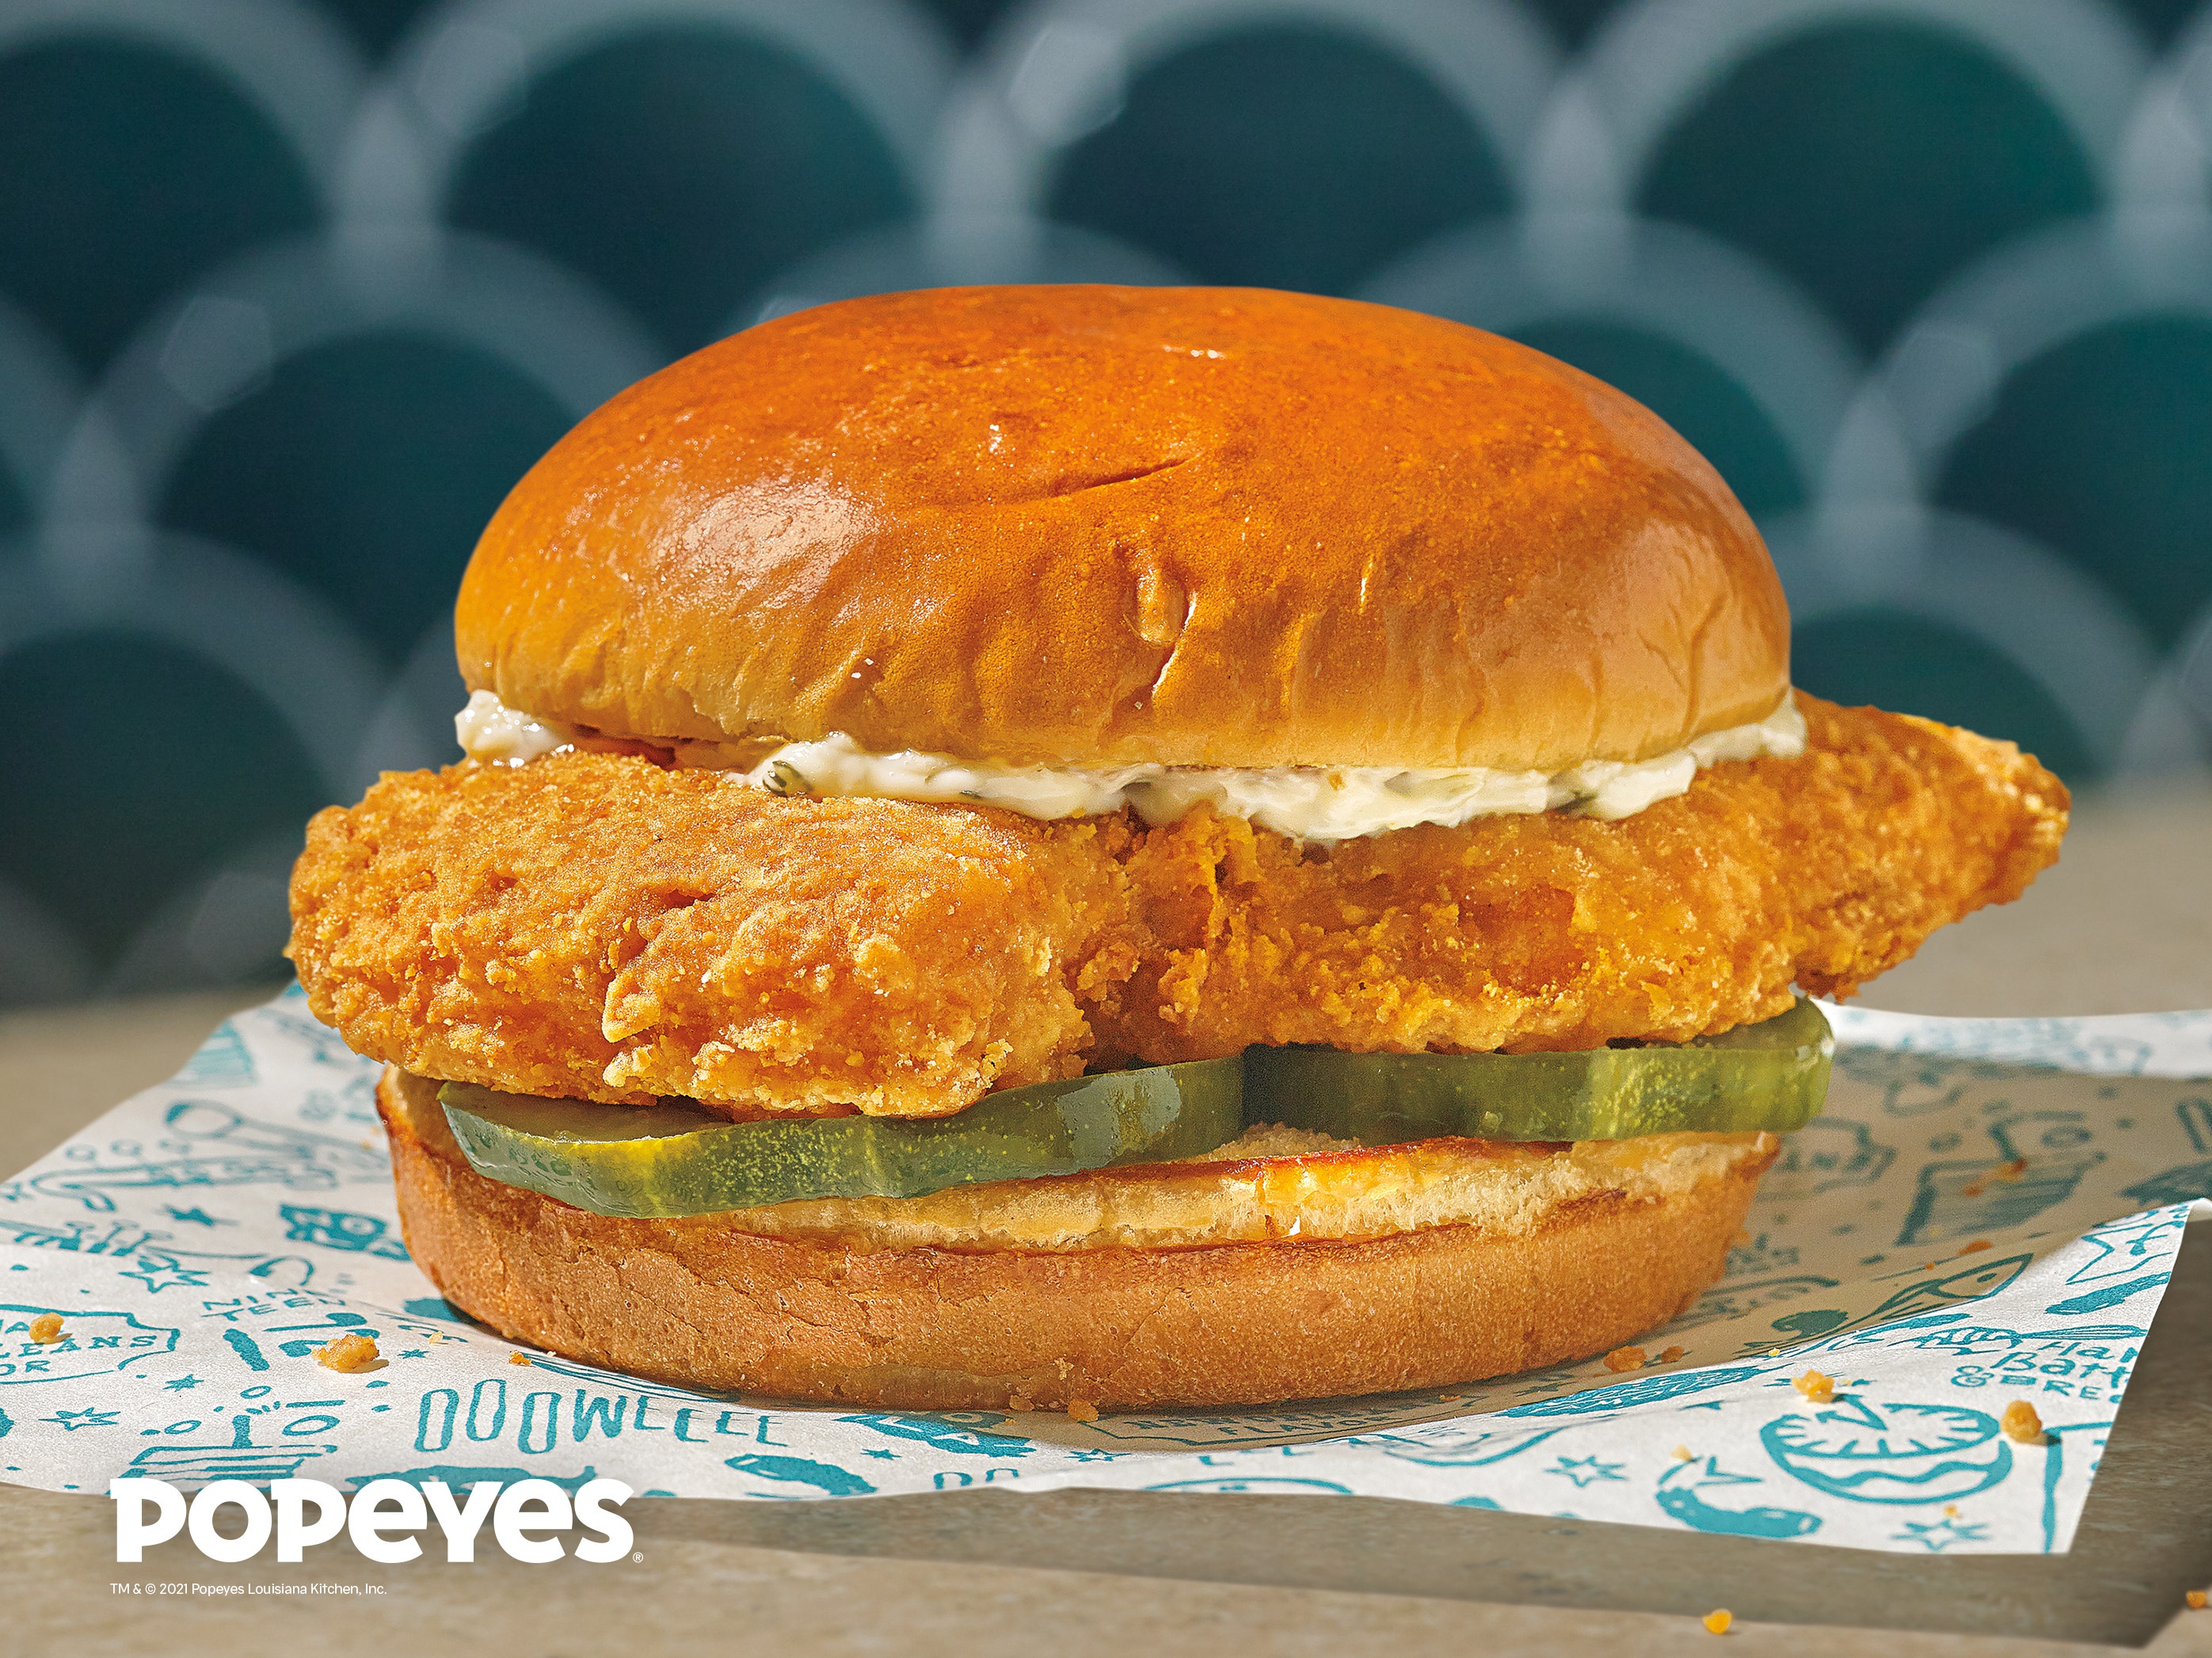 Popeyes following their chicken sandwich with the first fish sandwich of all time